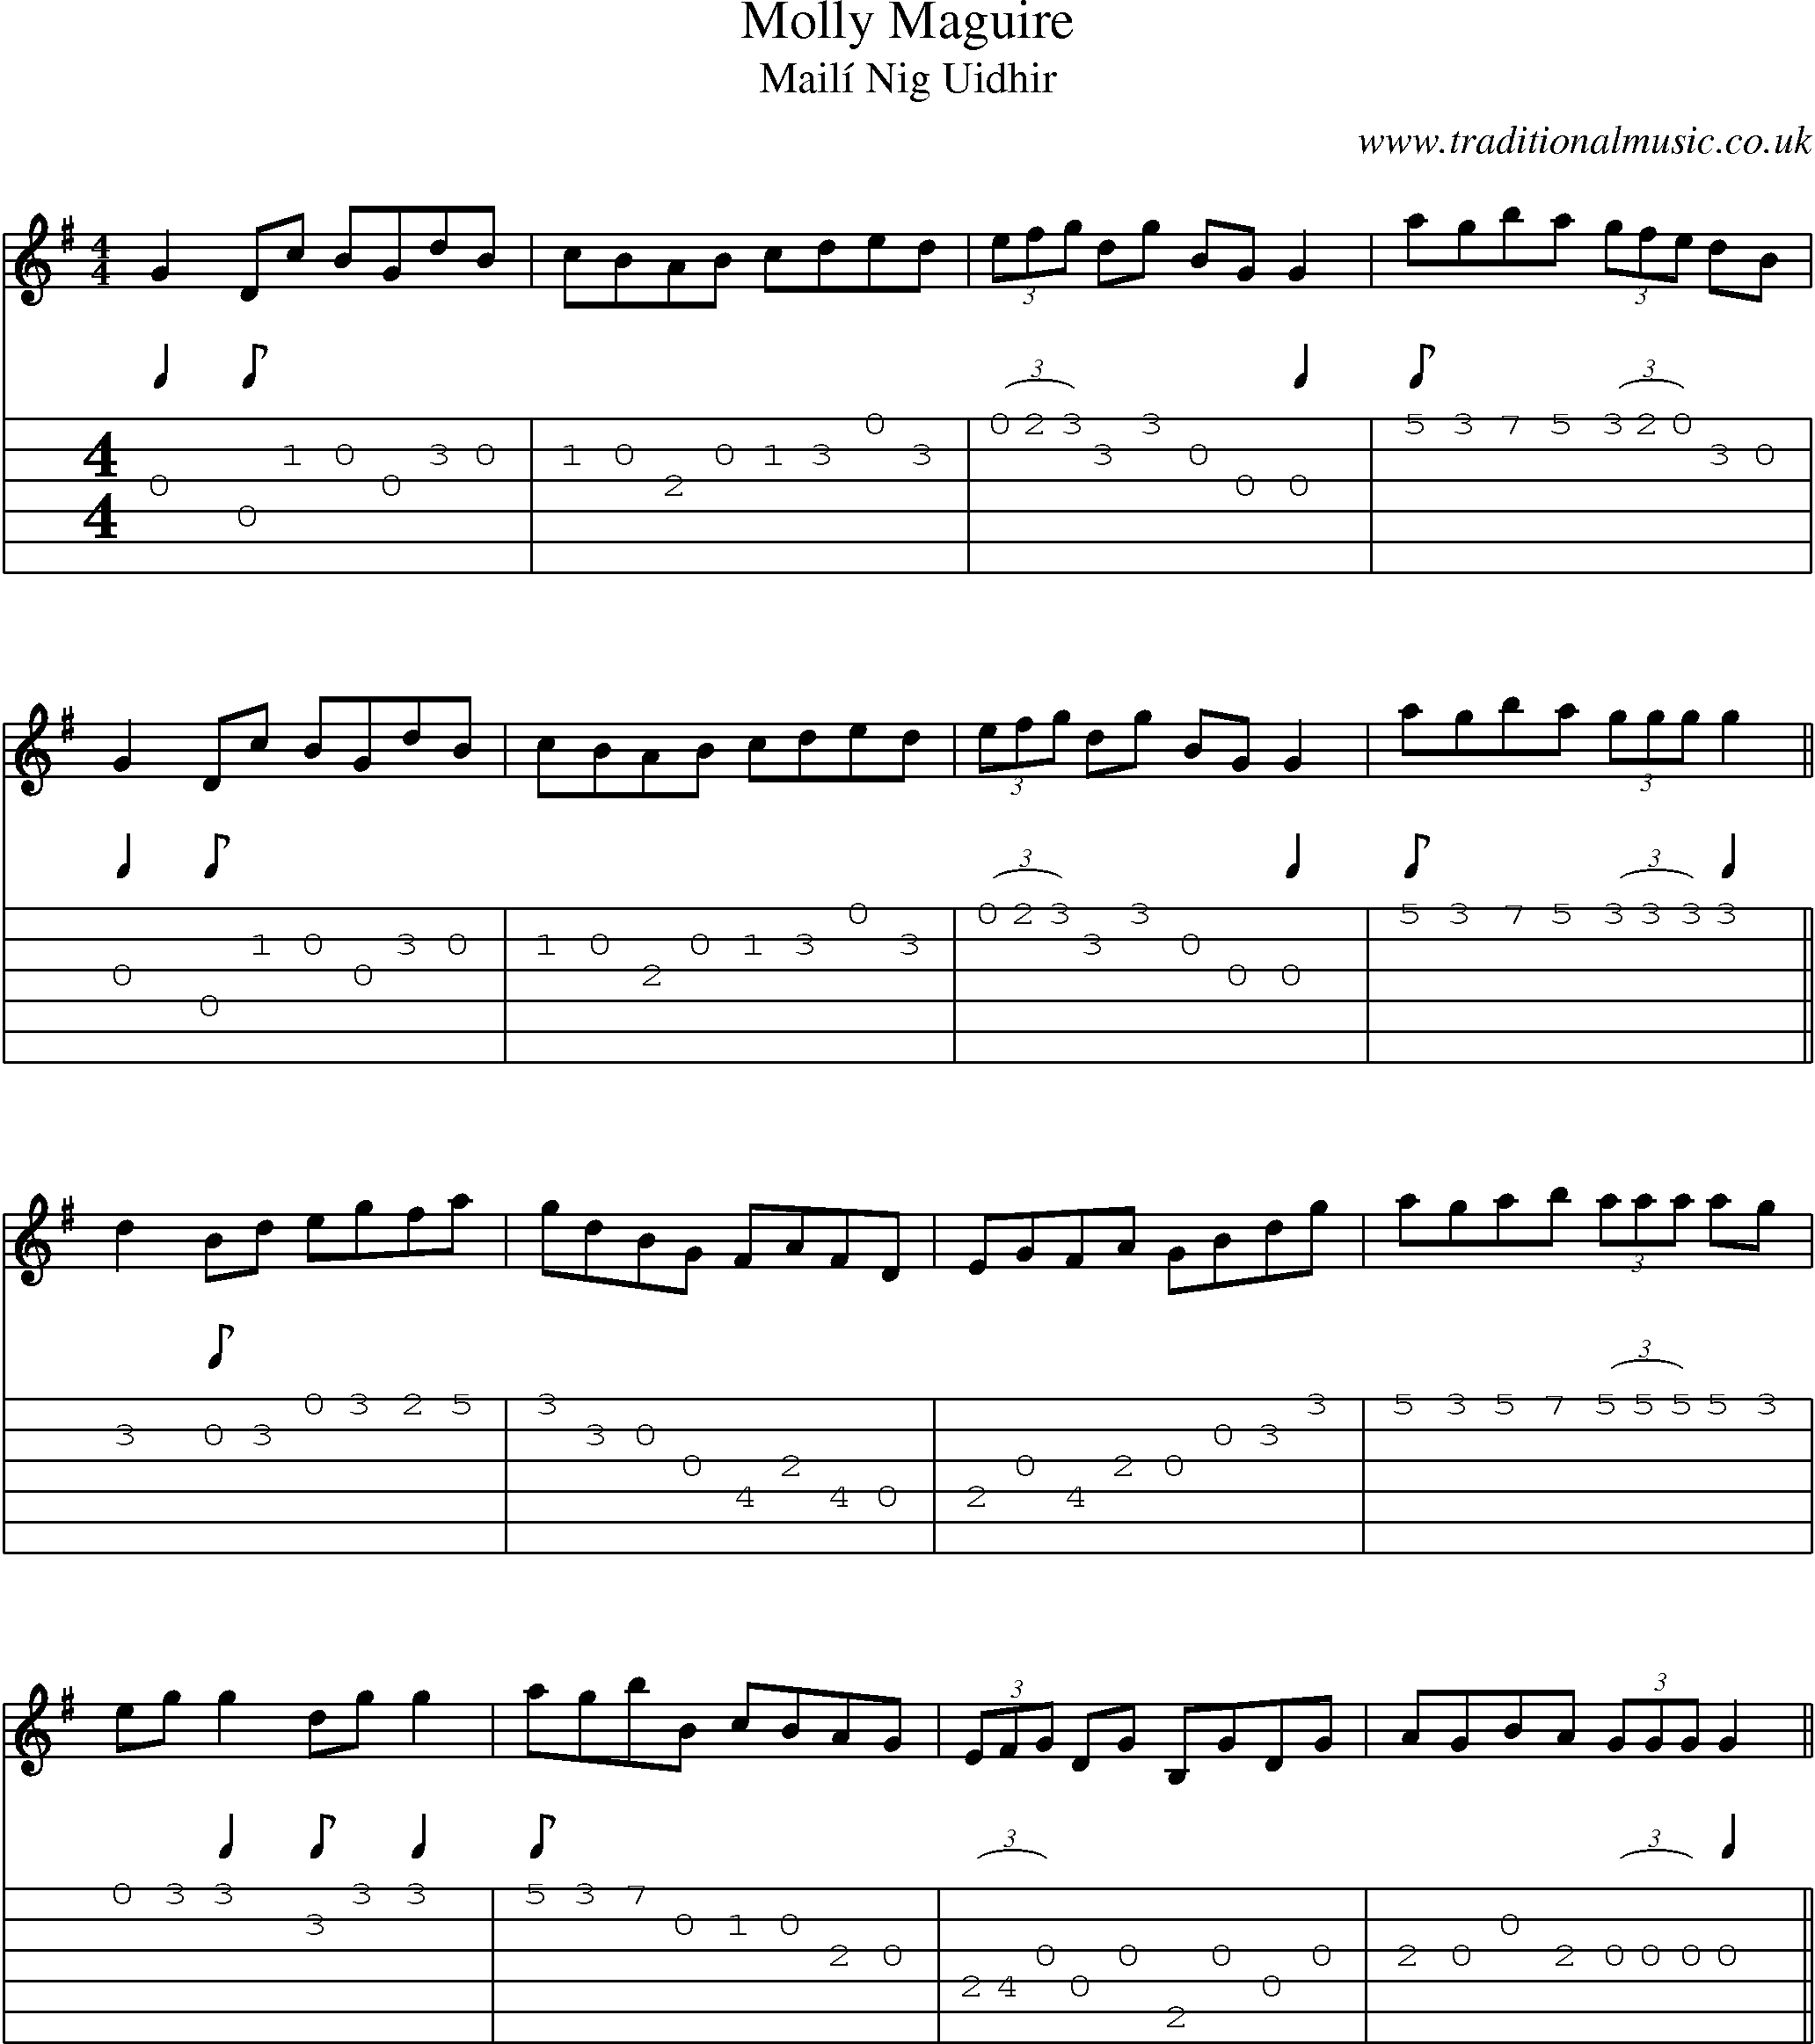 Music Score and Guitar Tabs for Molly Maguire